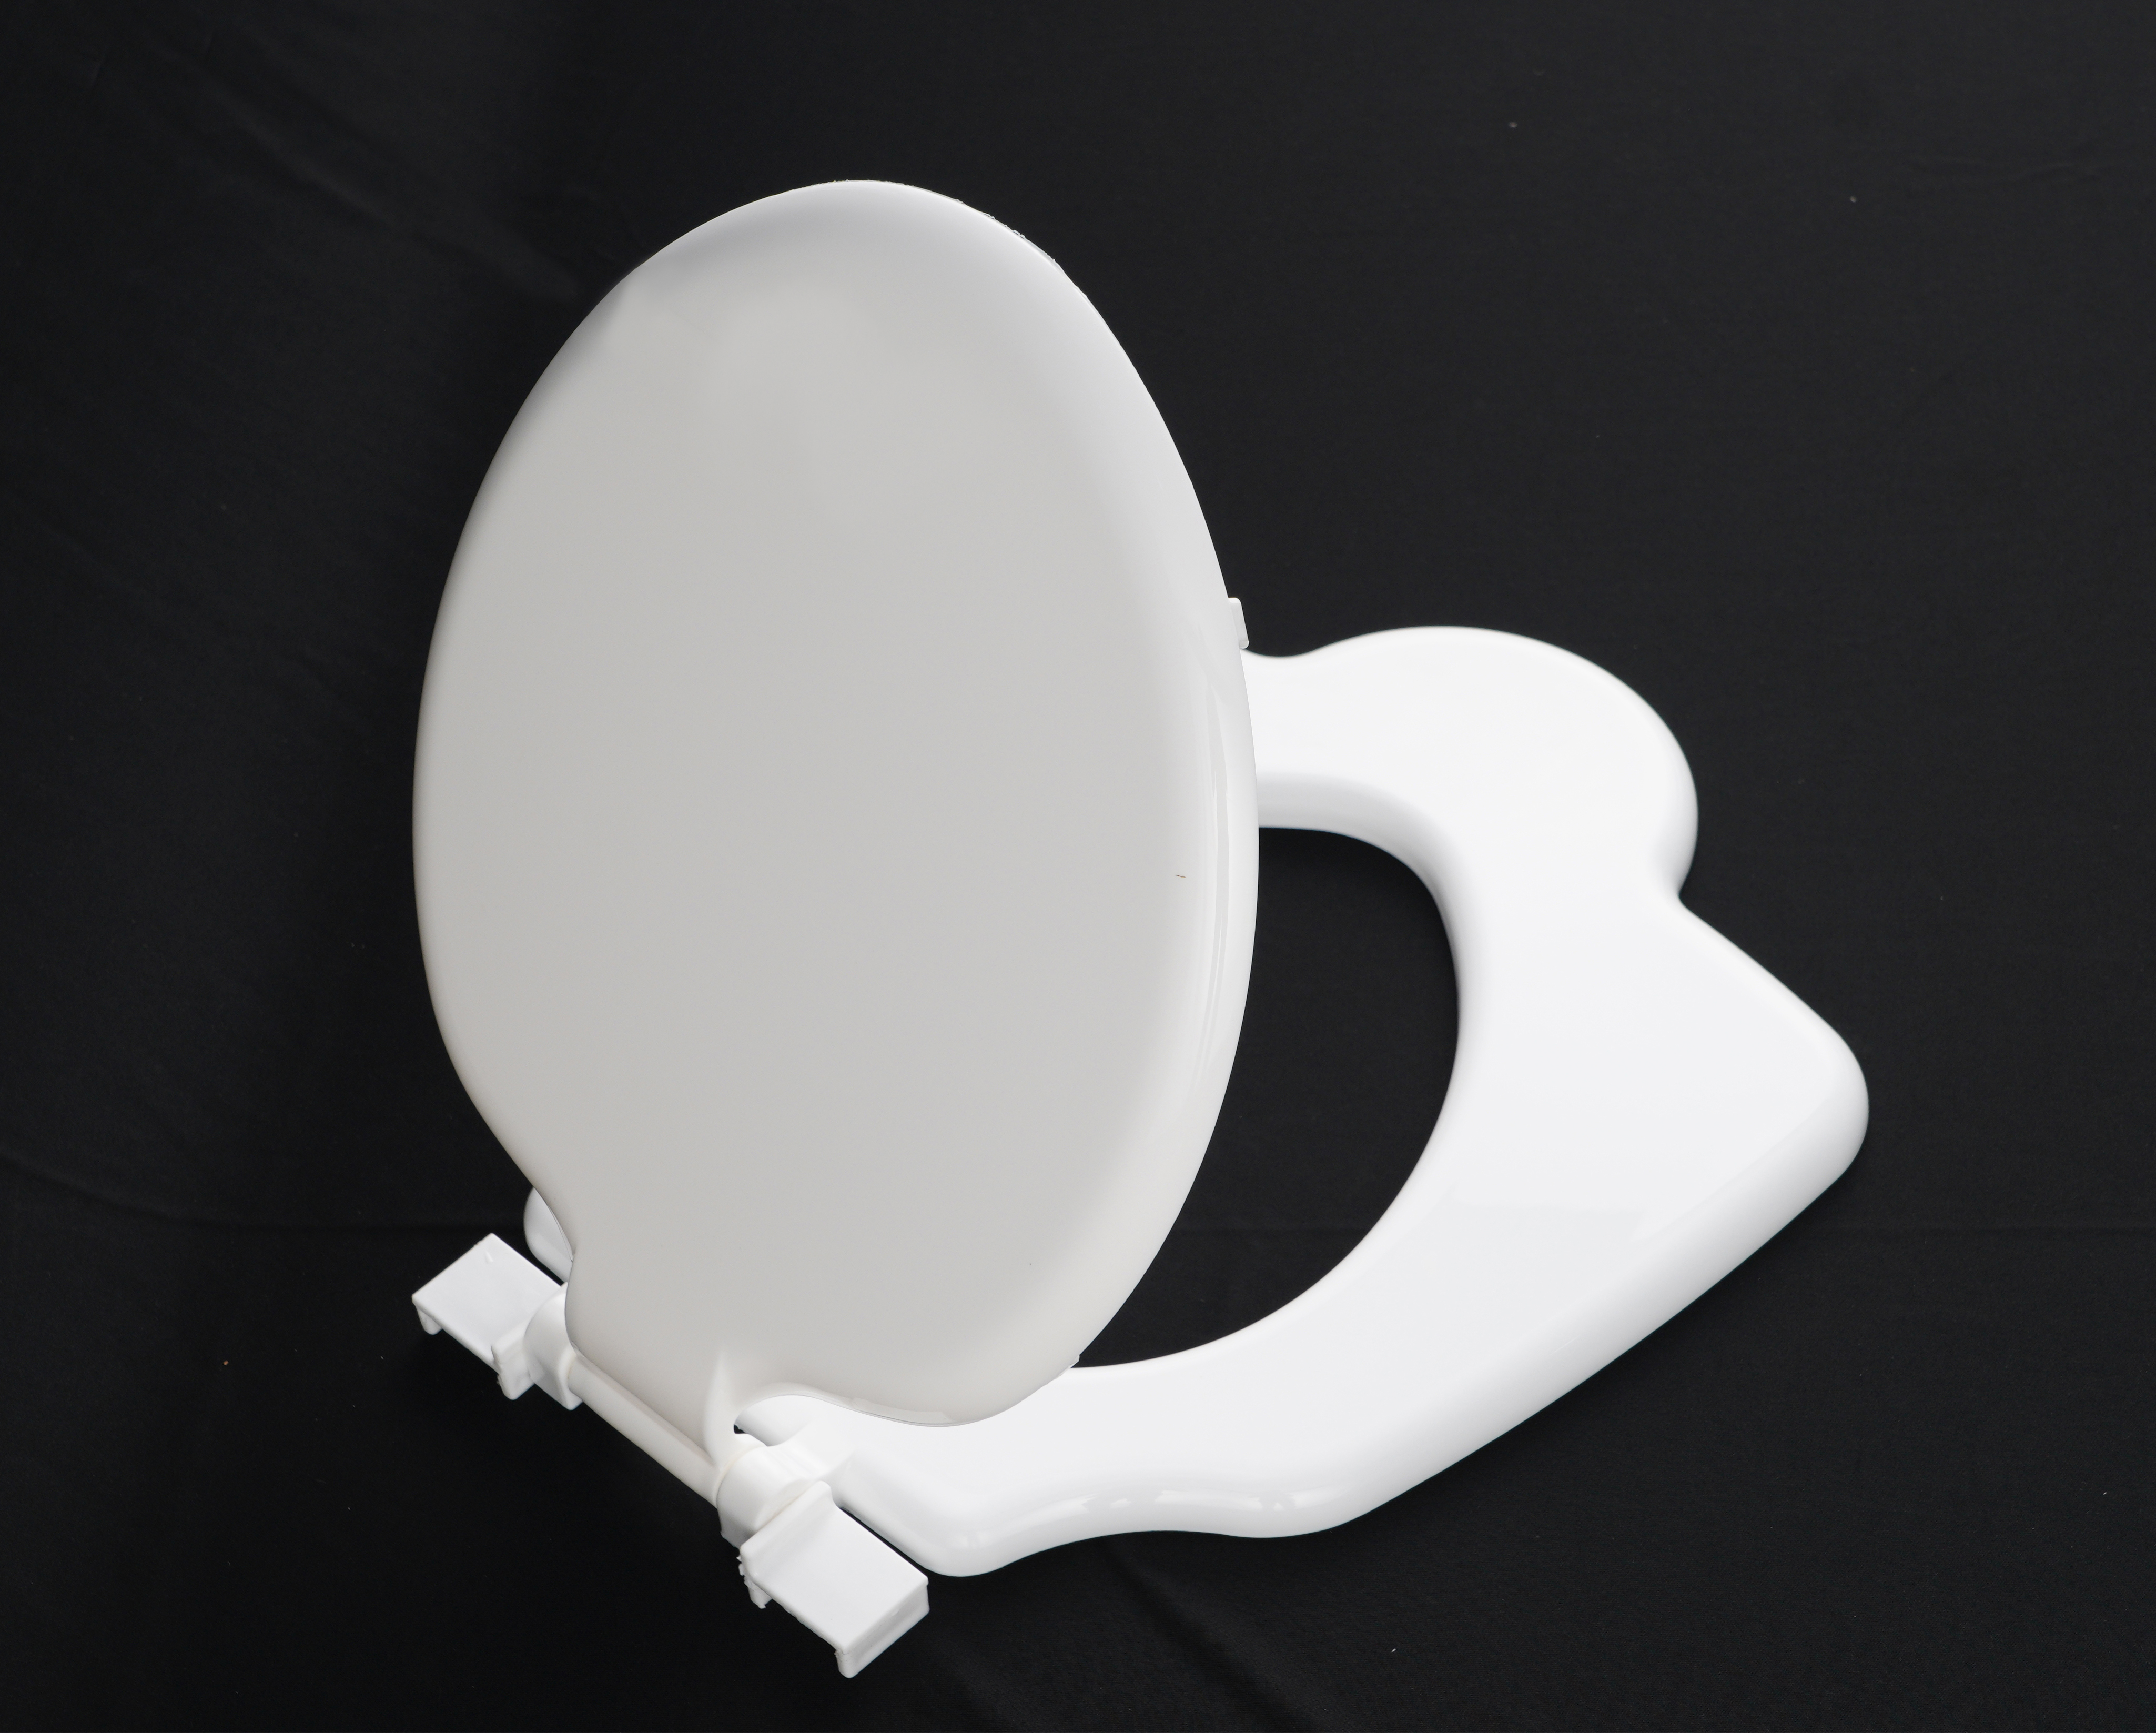 Anglo Indian Toilet Seat Cover